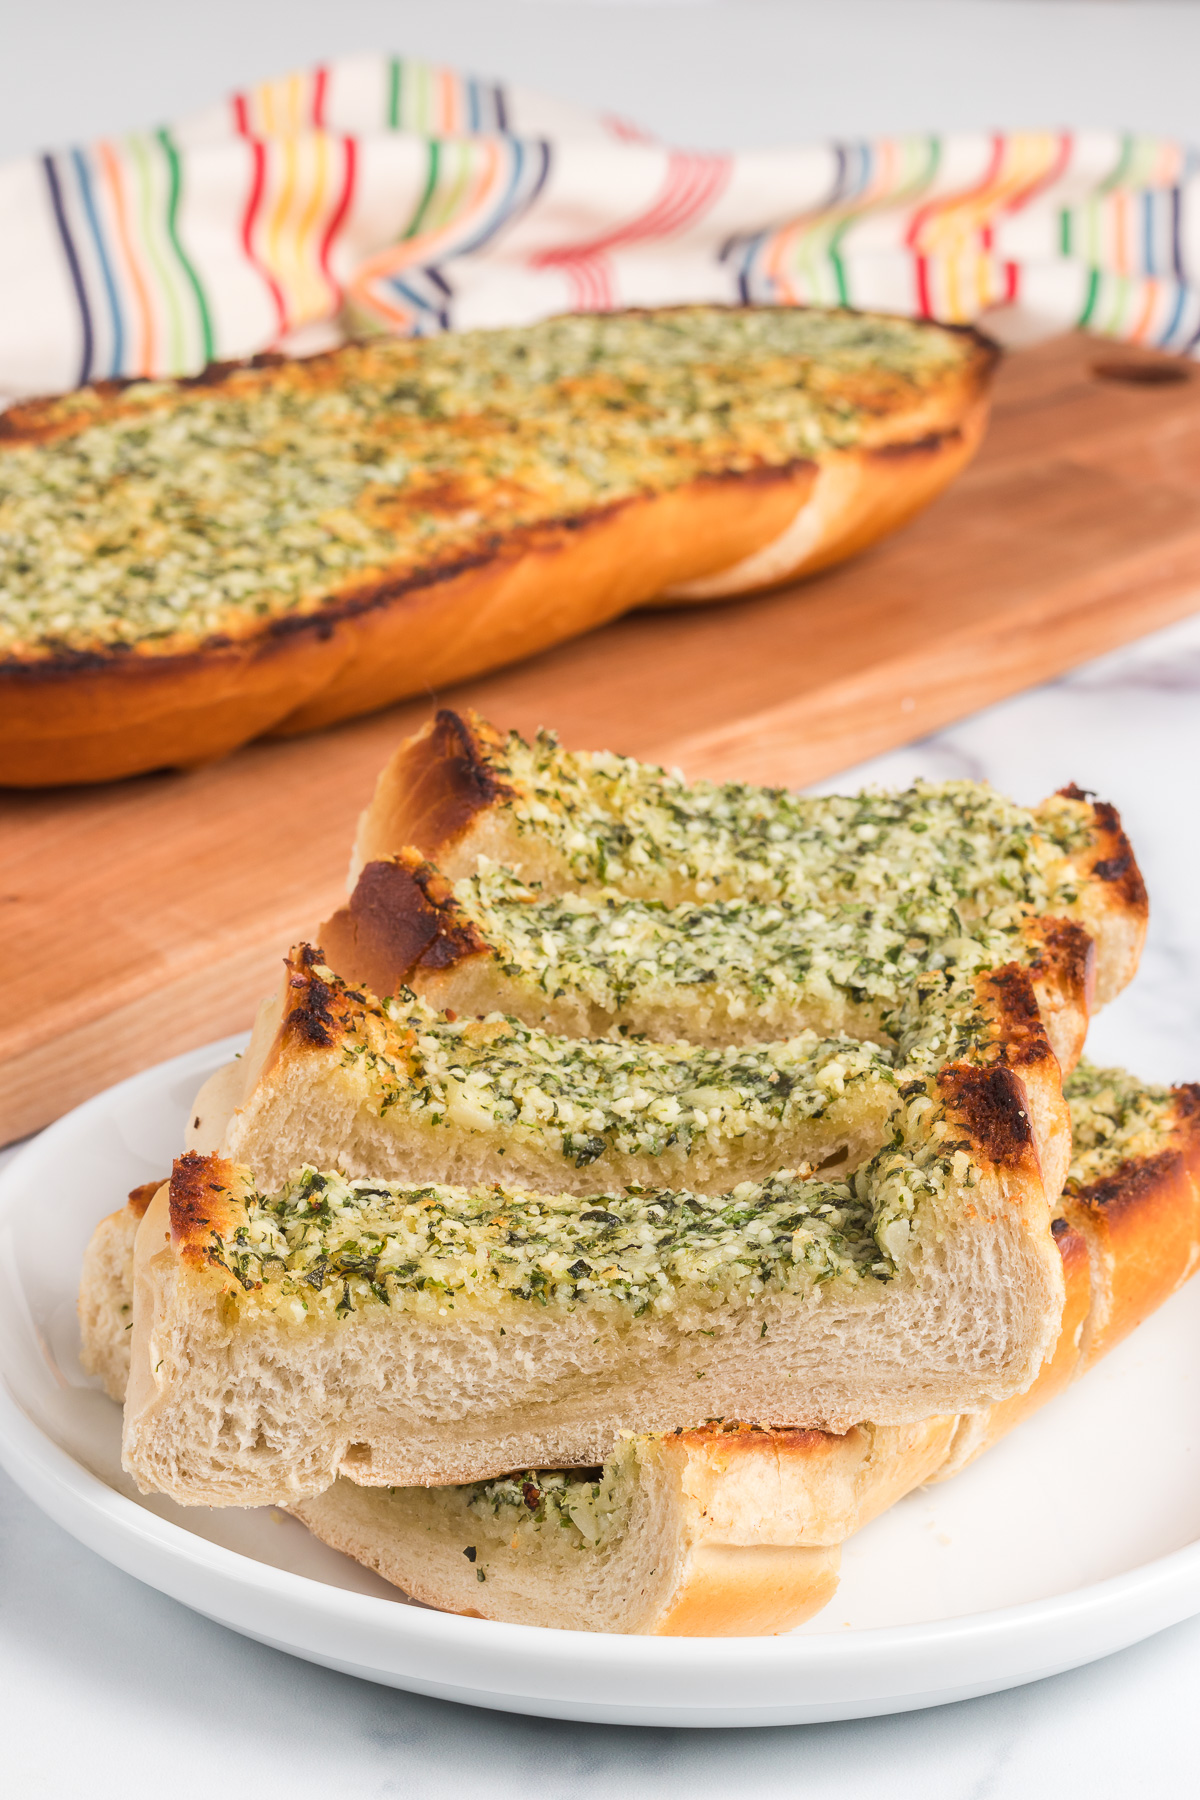 Cheesy Garlic Bread is the perfect accompaniment to any dish! Chewy Italian bread is slathered with herbed garlic butter and topped with gooey, melted cheese. Everyone will be clamoring for more! via @foodhussy